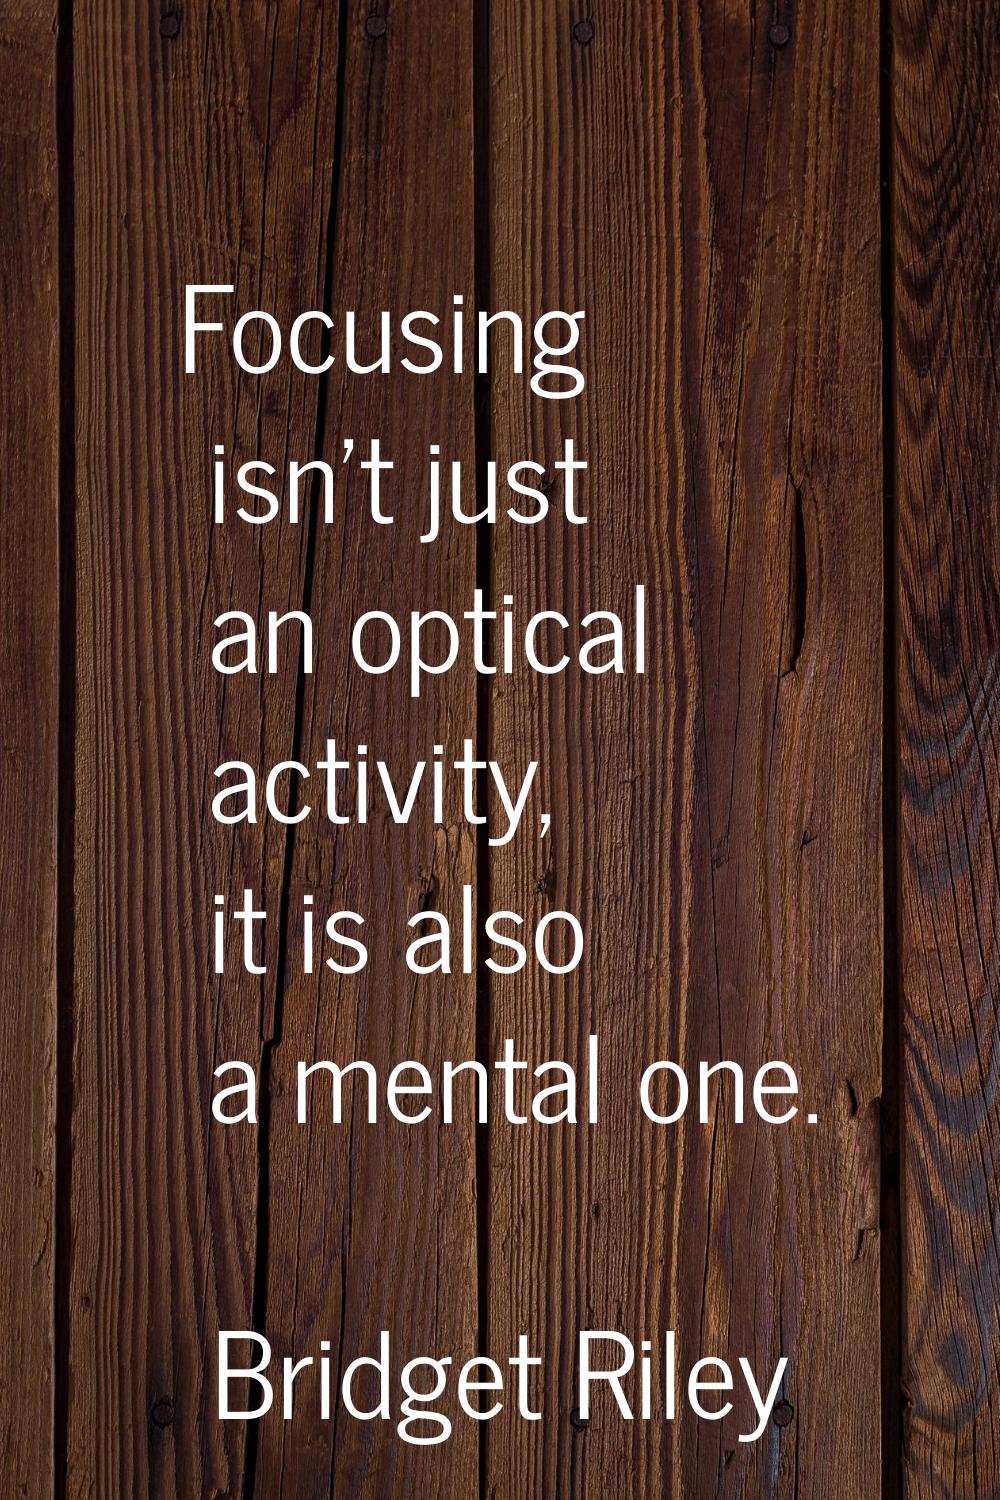 Focusing isn't just an optical activity, it is also a mental one.